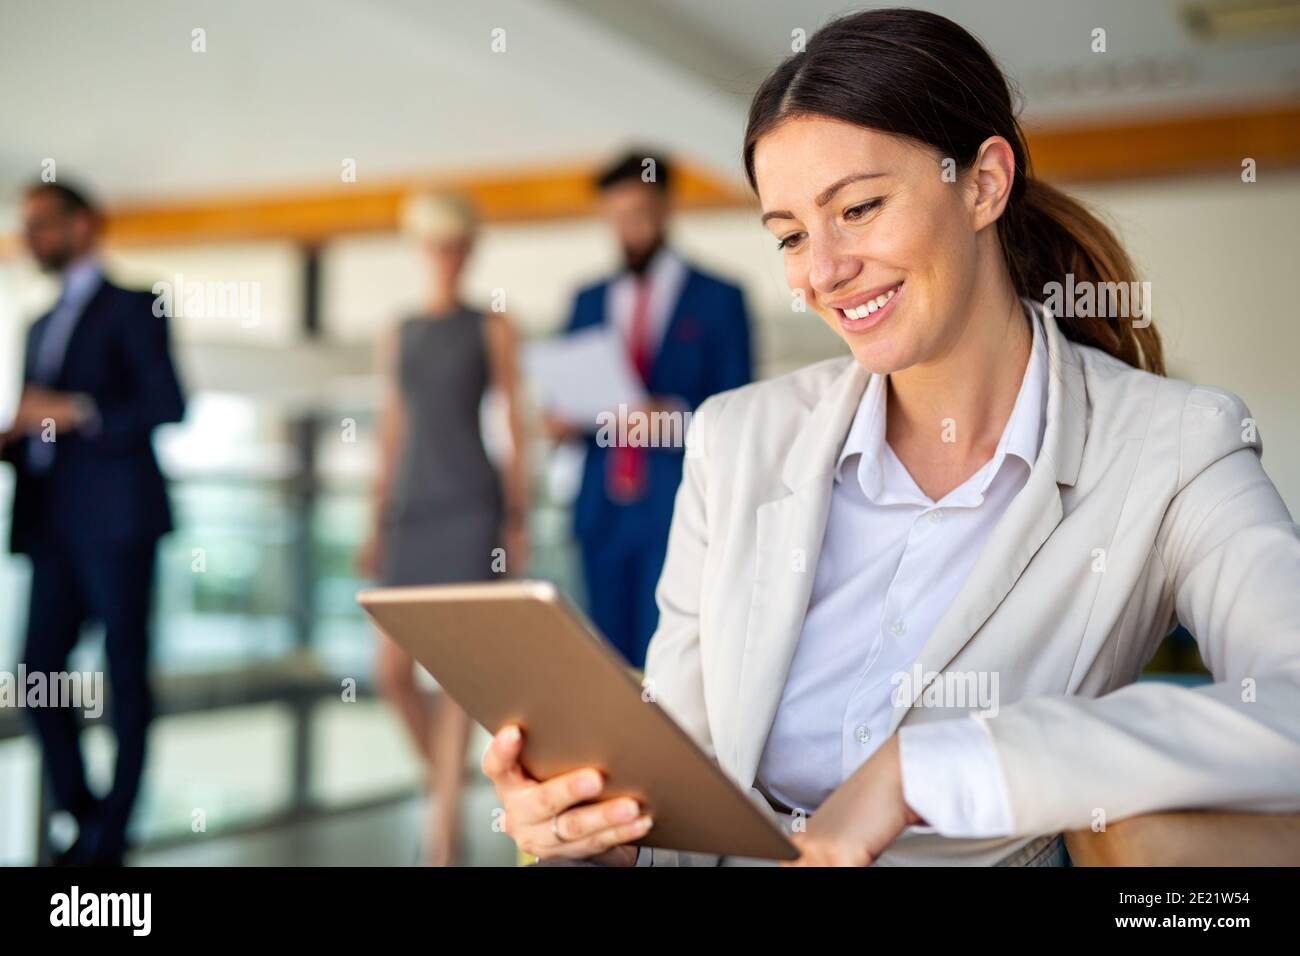 Attractive businesswoman using a digital tablet in office Banque D'Images